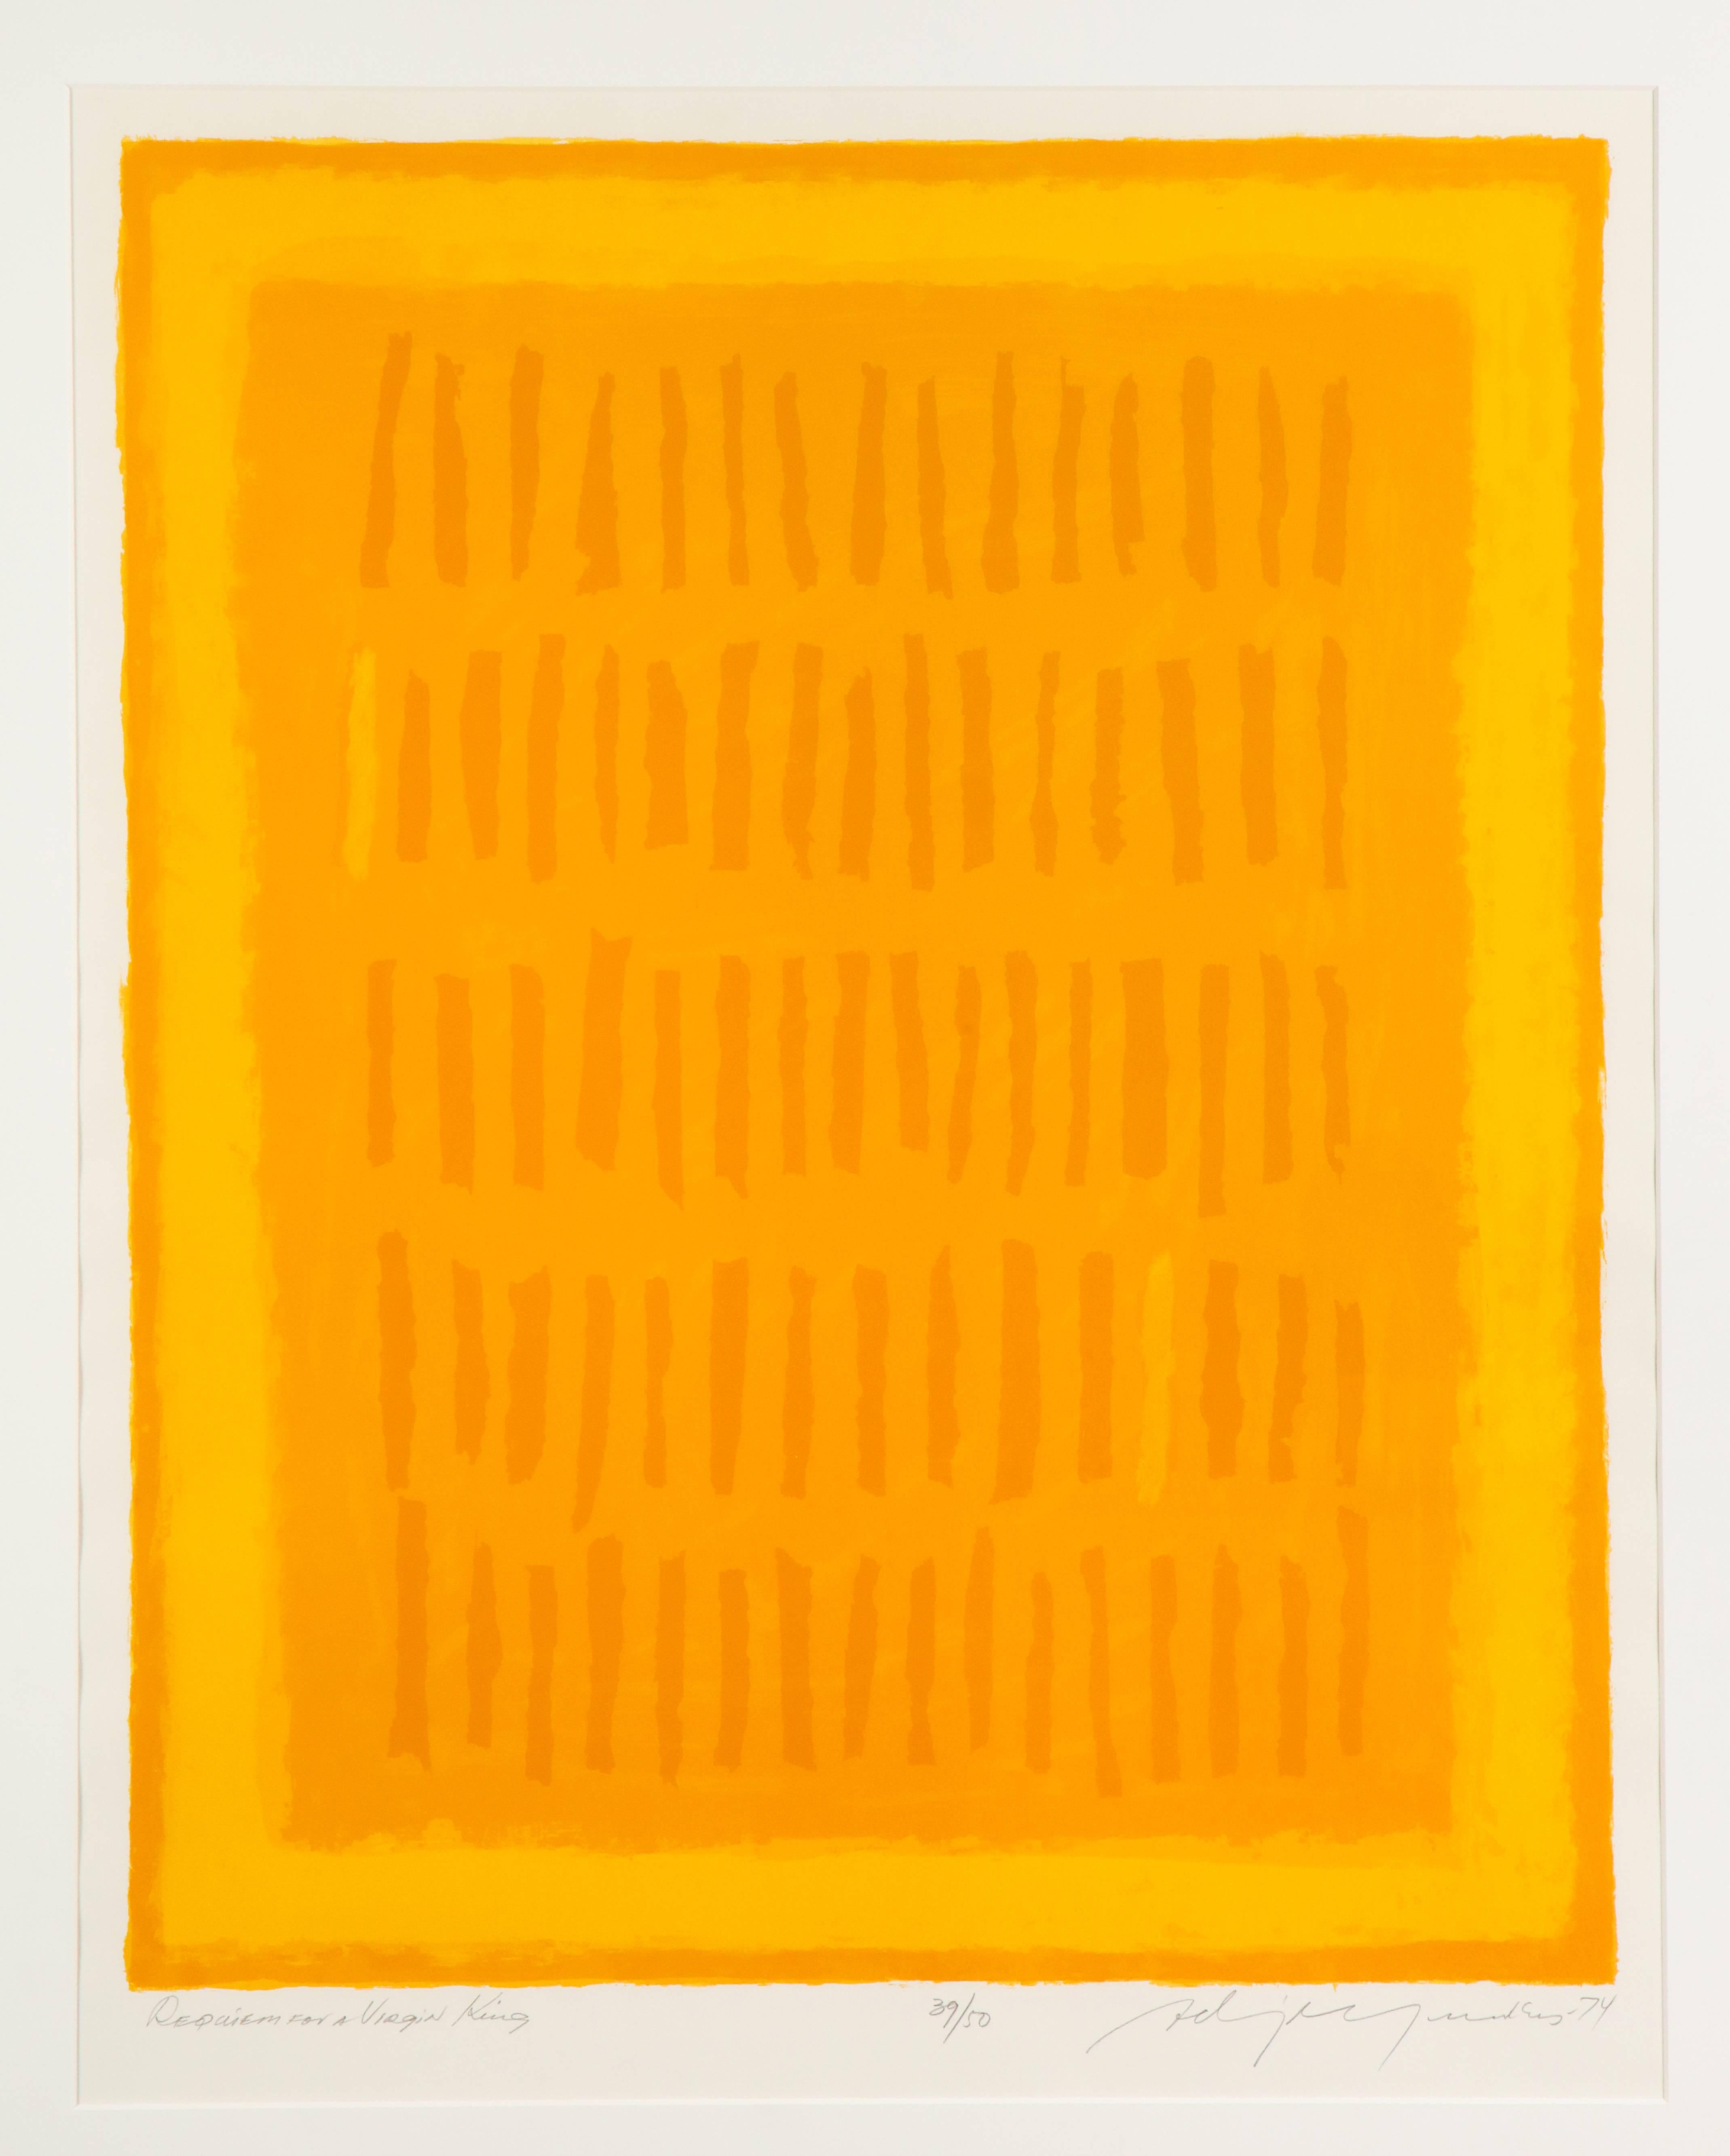 Requiem for a Virgin King by Adja Yunkers (1900-1983), abstract lithograph, yellow, signed. Large lithograph on wove paper. Signed and dated in pencil in lower right. Numbered 39/50 and titled: Requiem for a Virgin King. Image size measures: 46 x